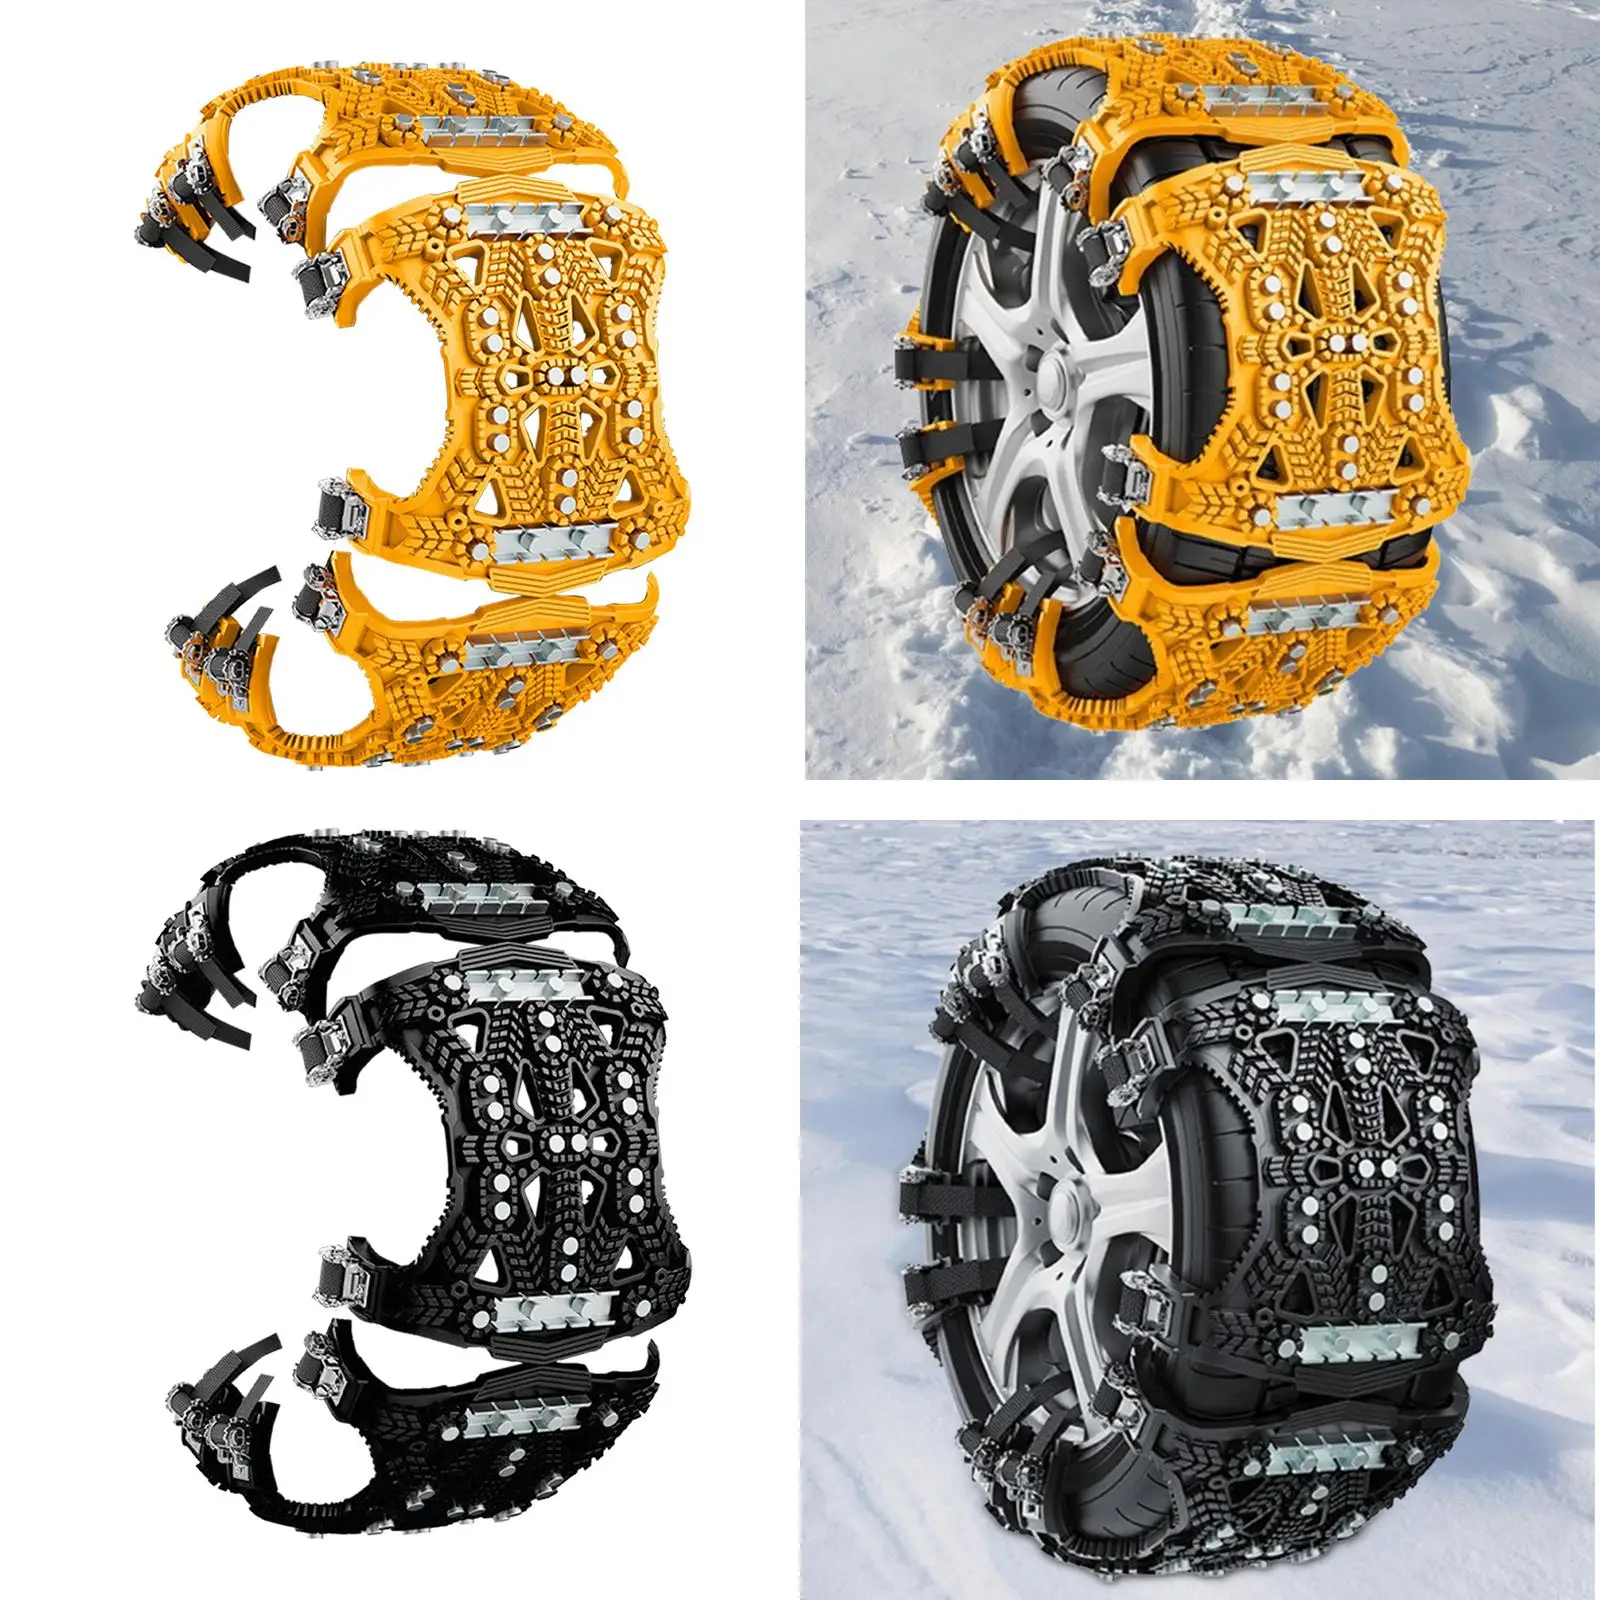 Car Wheel Tire Ice Snow Chain Portable for Snowy and Muddy Roads Sturdy